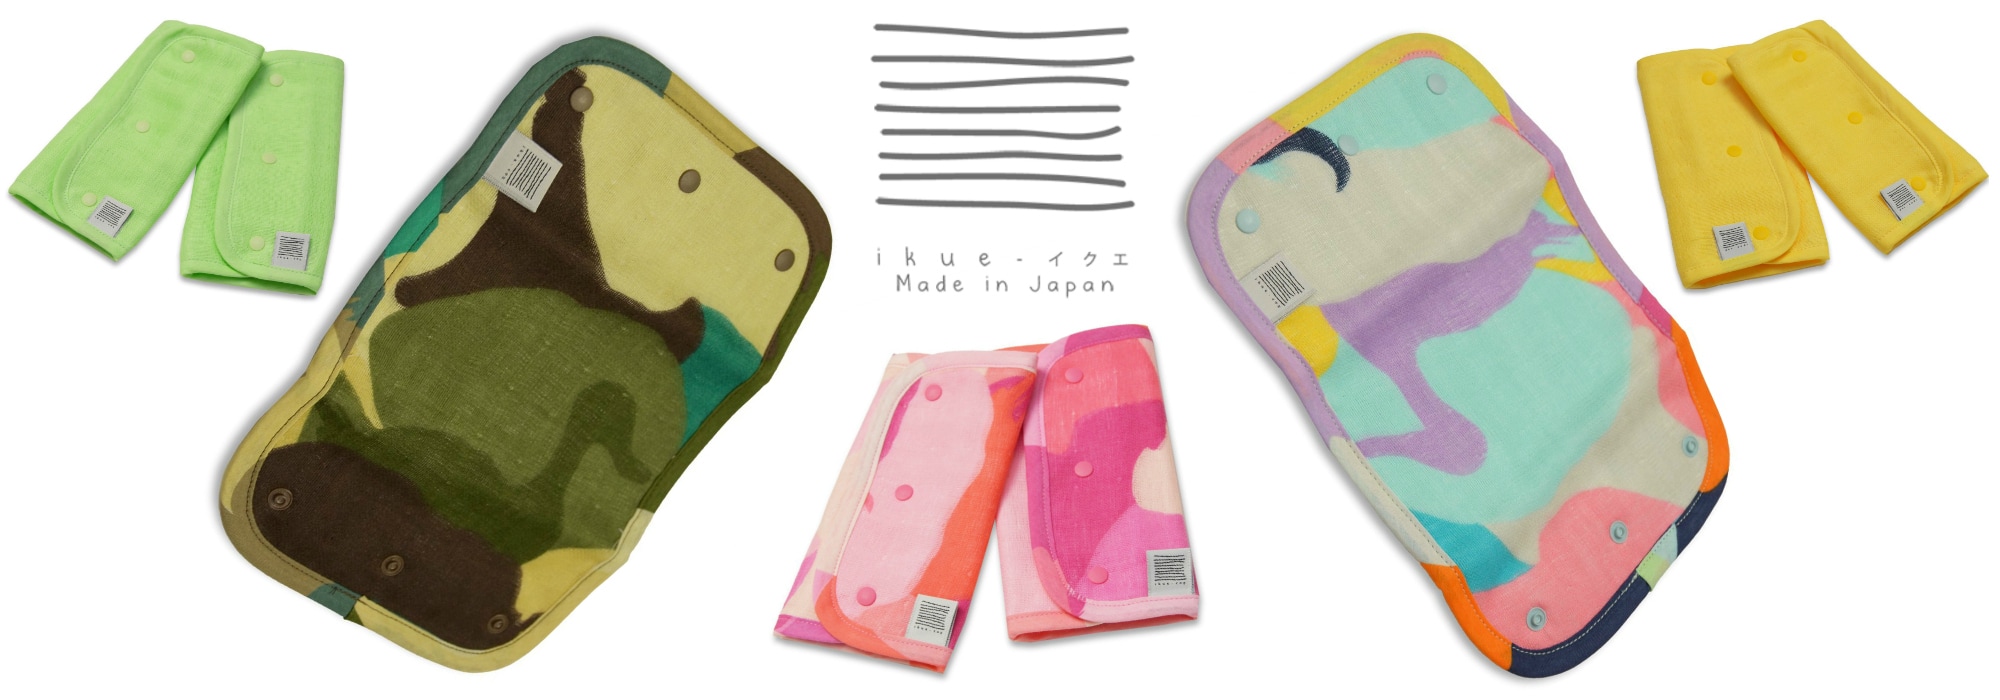 Win a set of Ikue baby belt strap covers in US Japan Fam's $500 value 